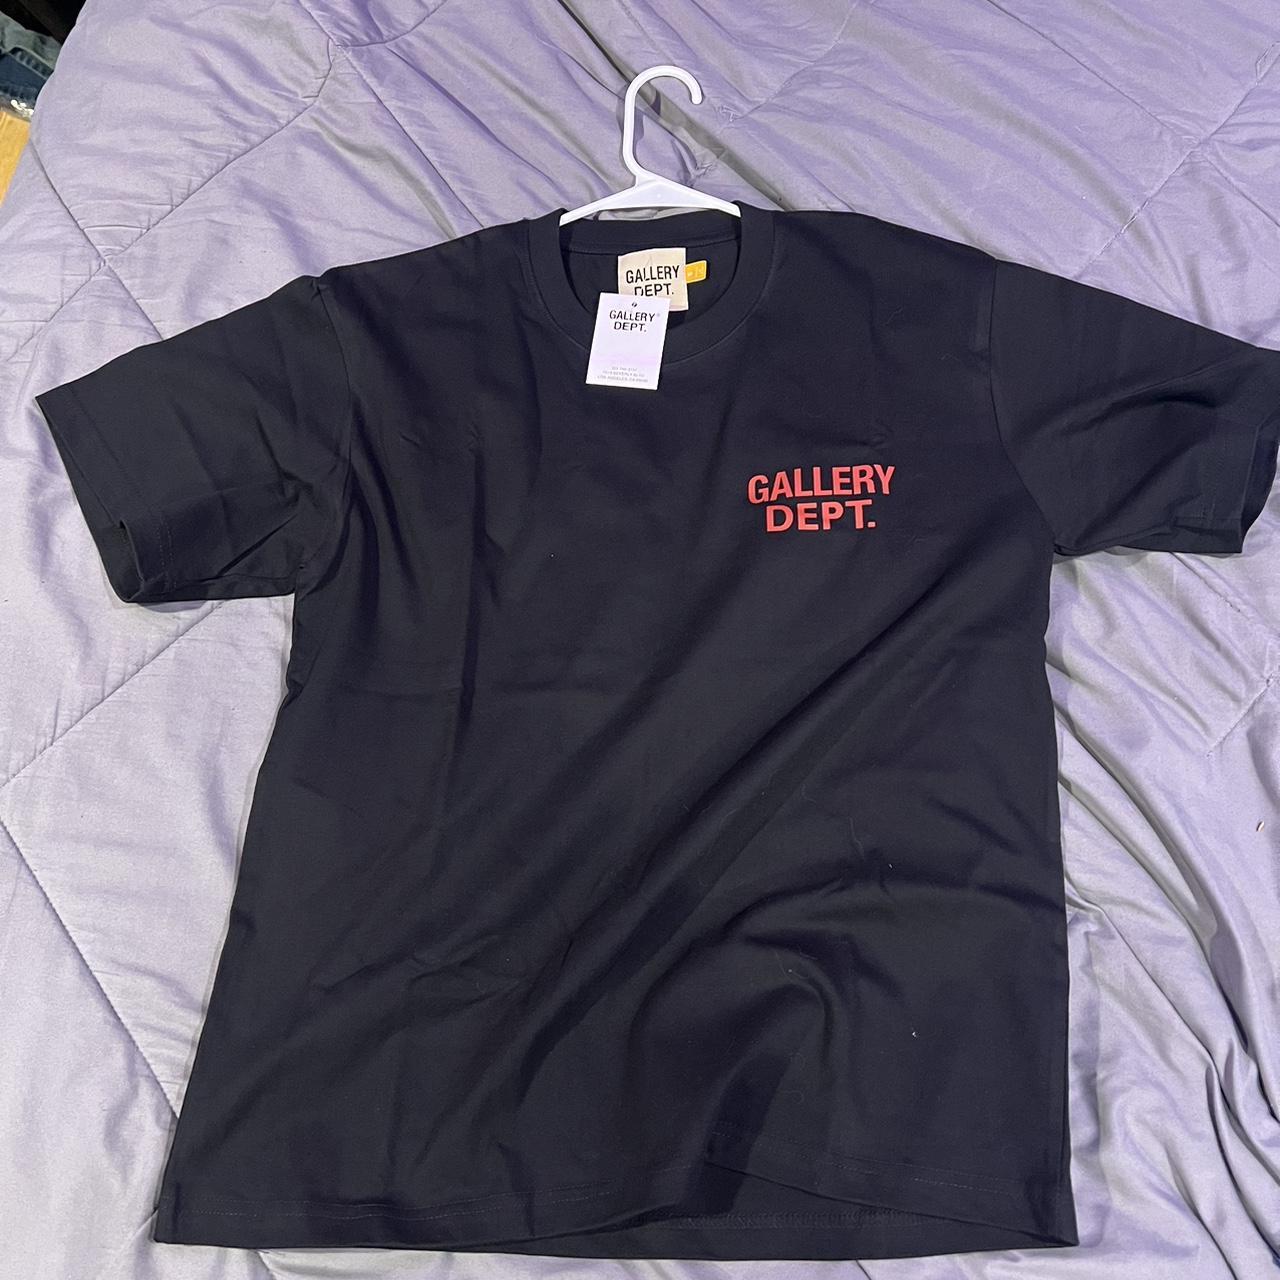 Men’s gallery dept basic tee Size small with slight... - Depop